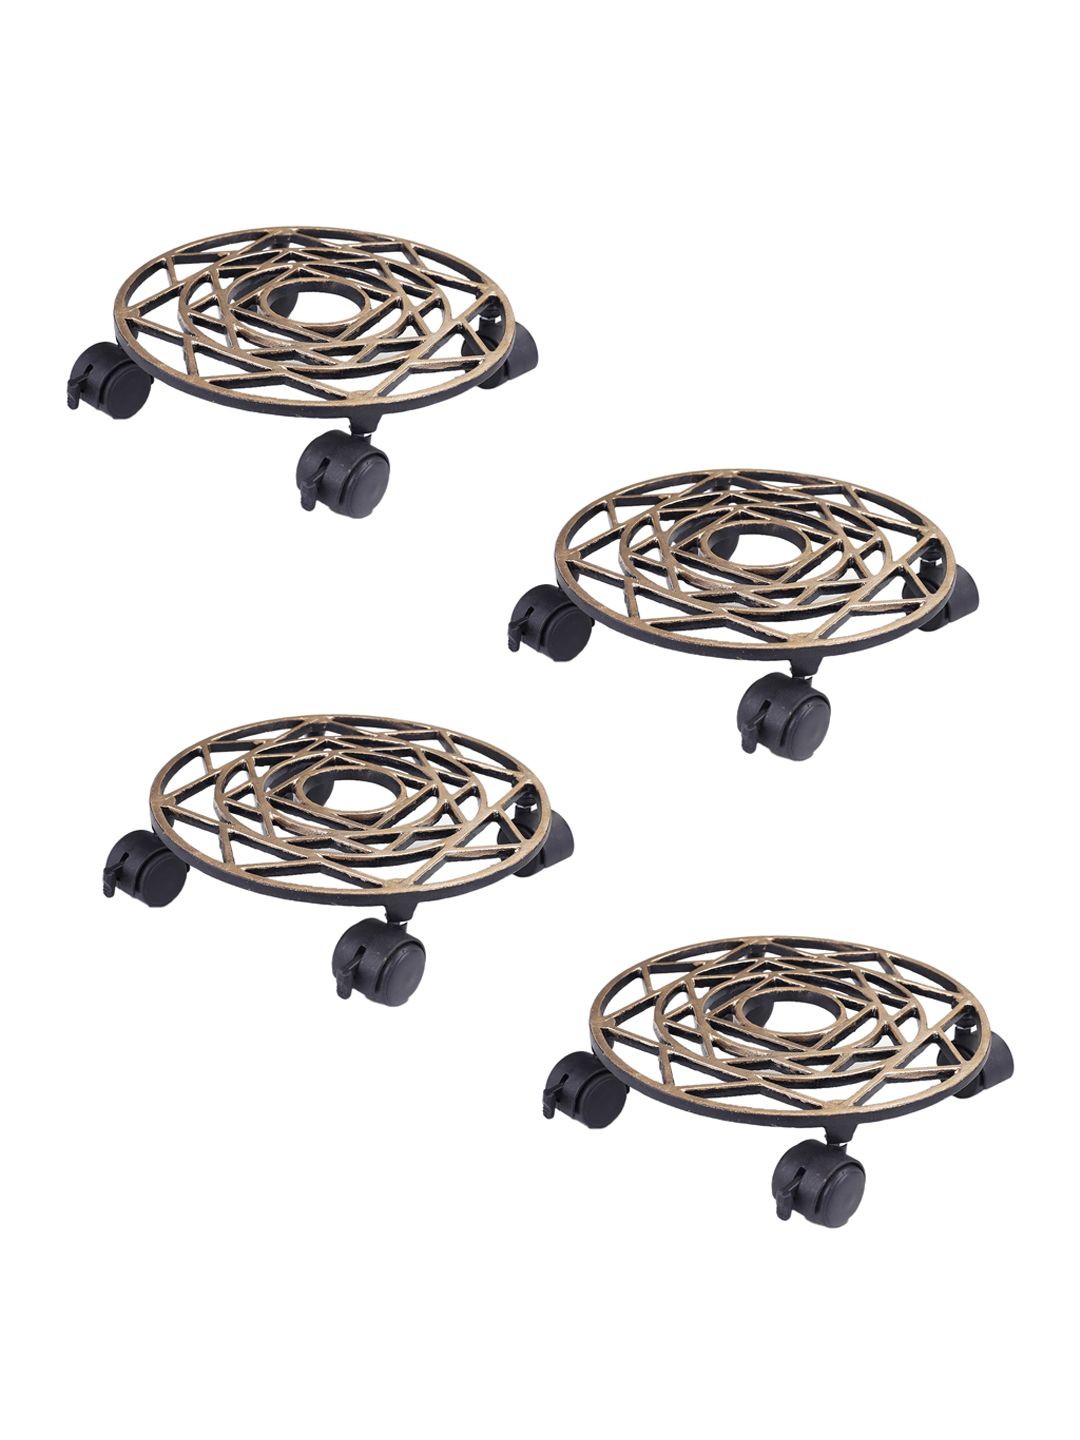 Sharpex Set Of 4 Gold-Toned Dolly Round Rack Price in India